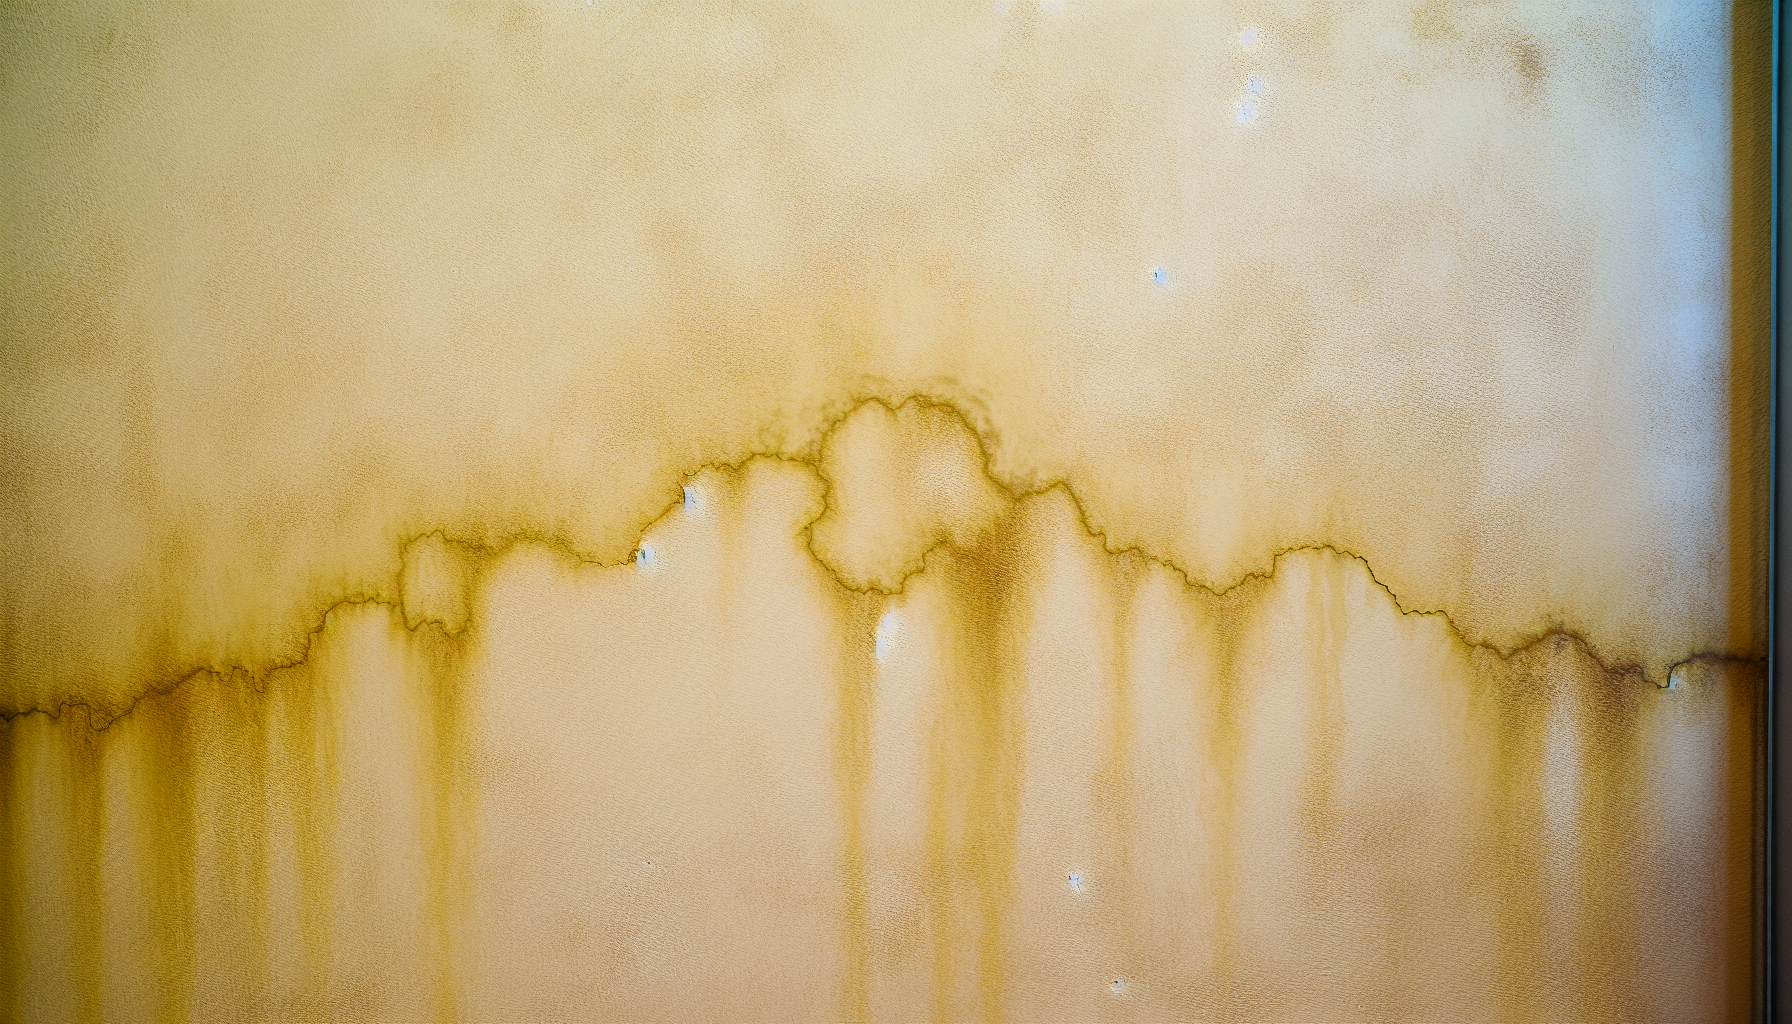 Water stains on wall indicating a potential plumbing leak